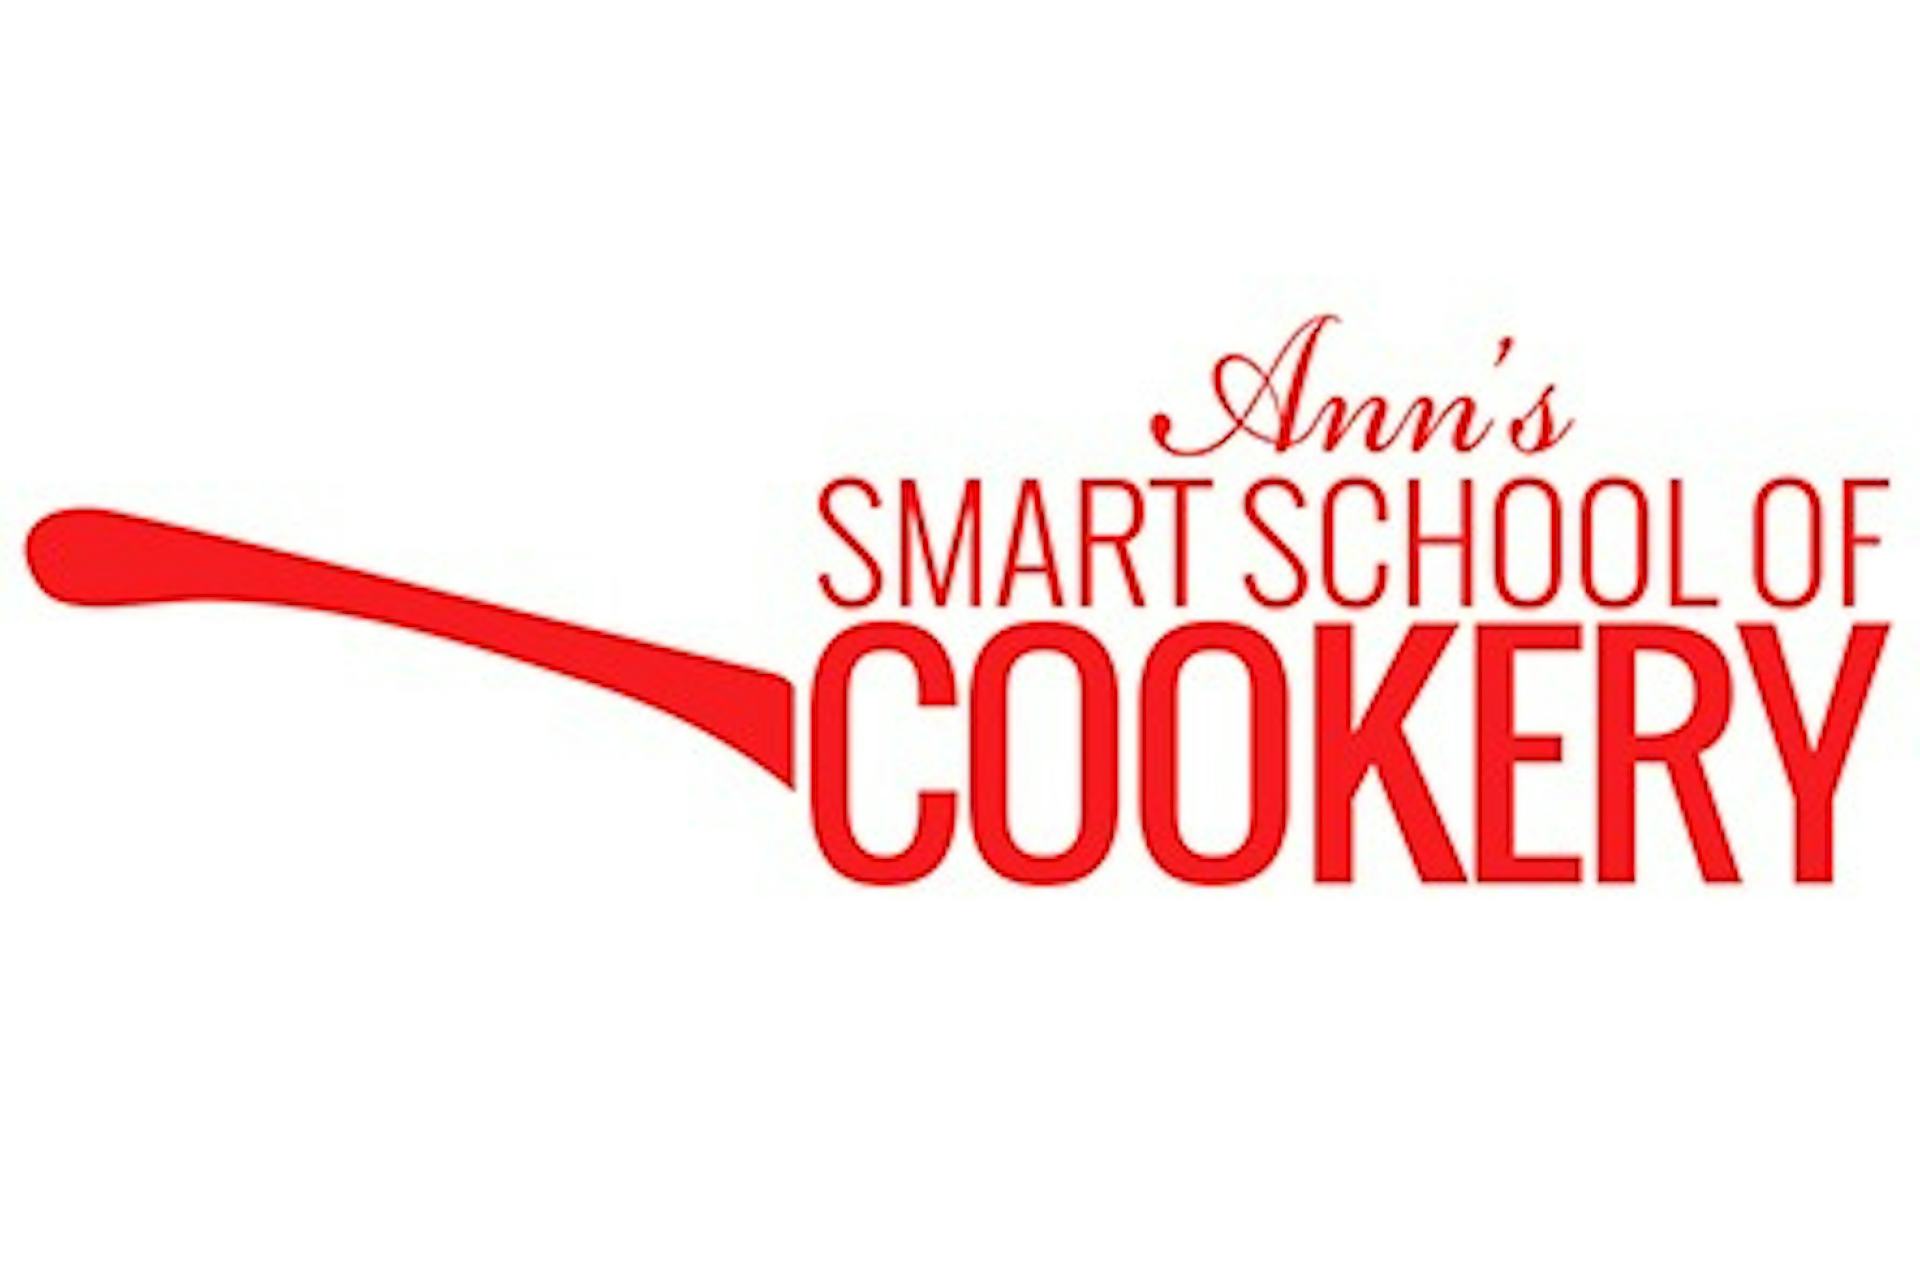 Introductory Cookery Masterclass at Ann's Smart School of Cookery